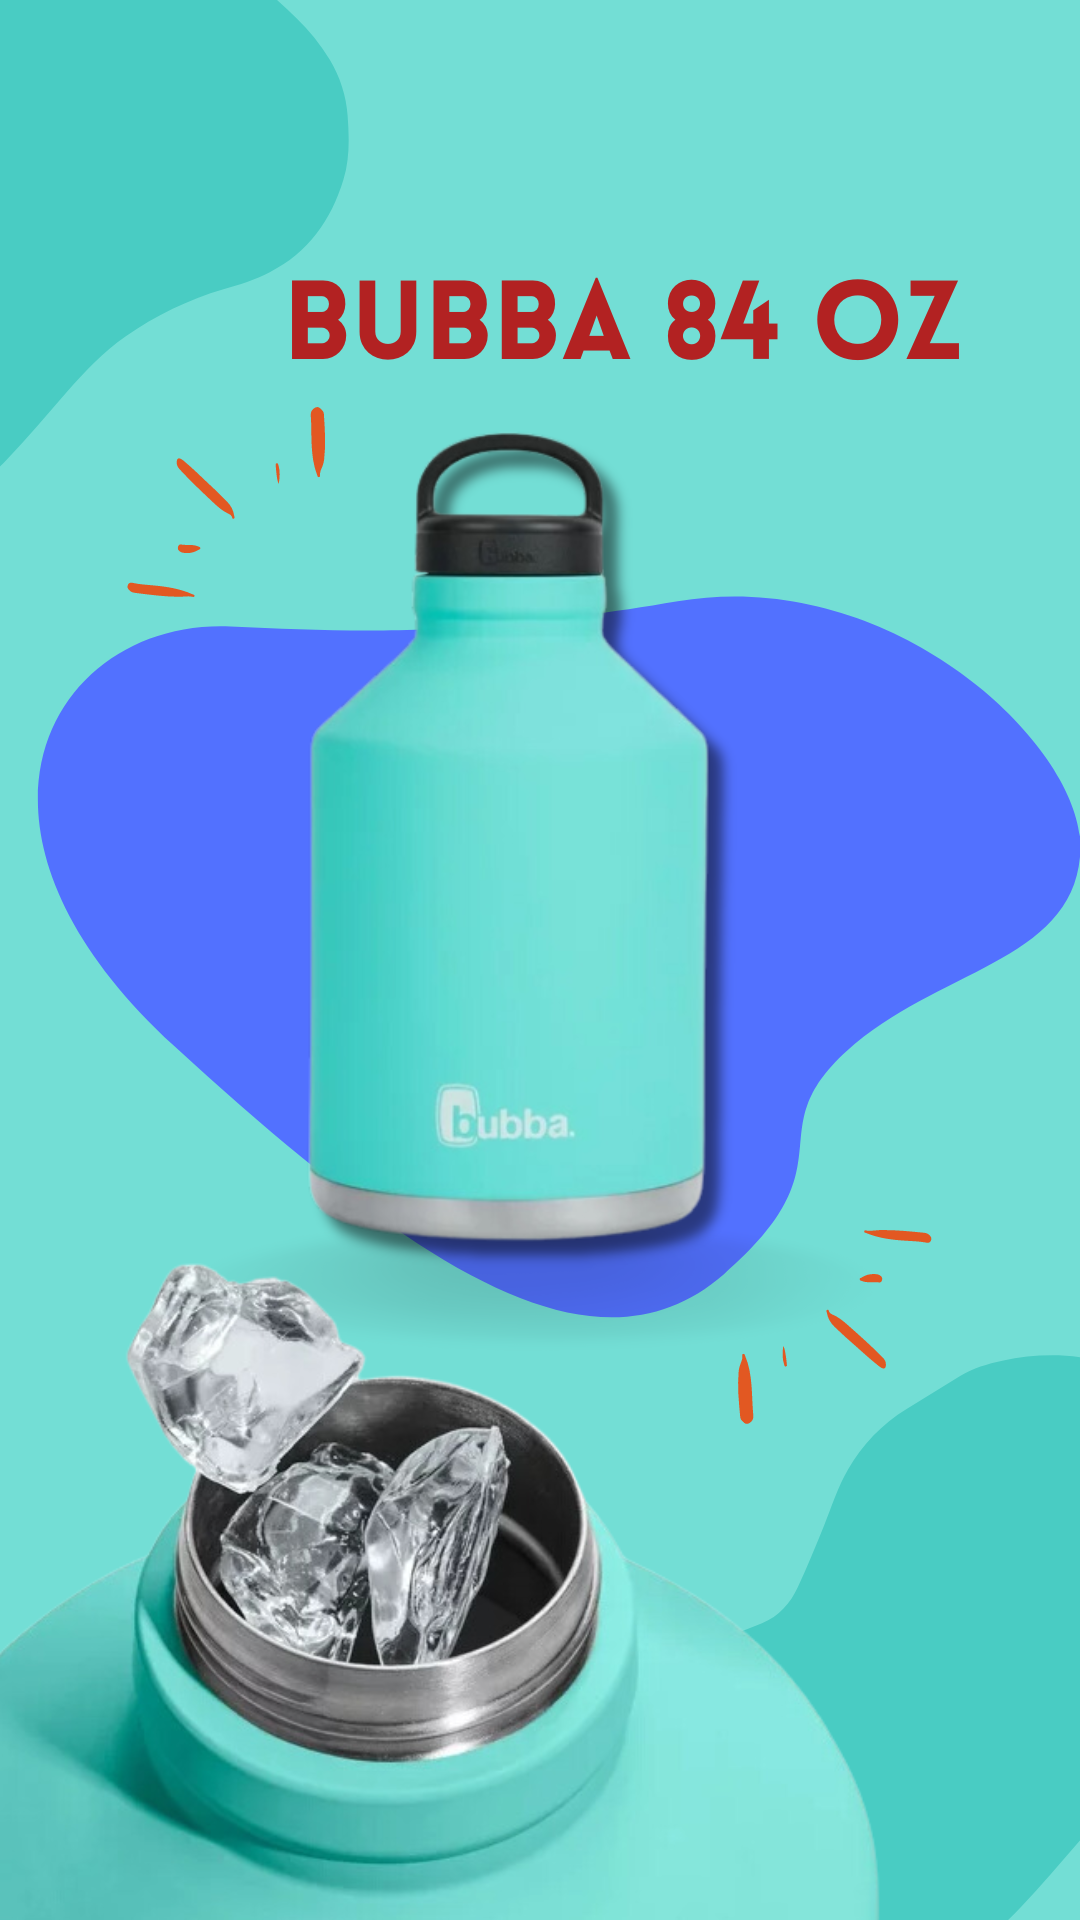 Bubba 84 oz Island Teal Insulated Stainless Steel Water Bottle with Screw Cap